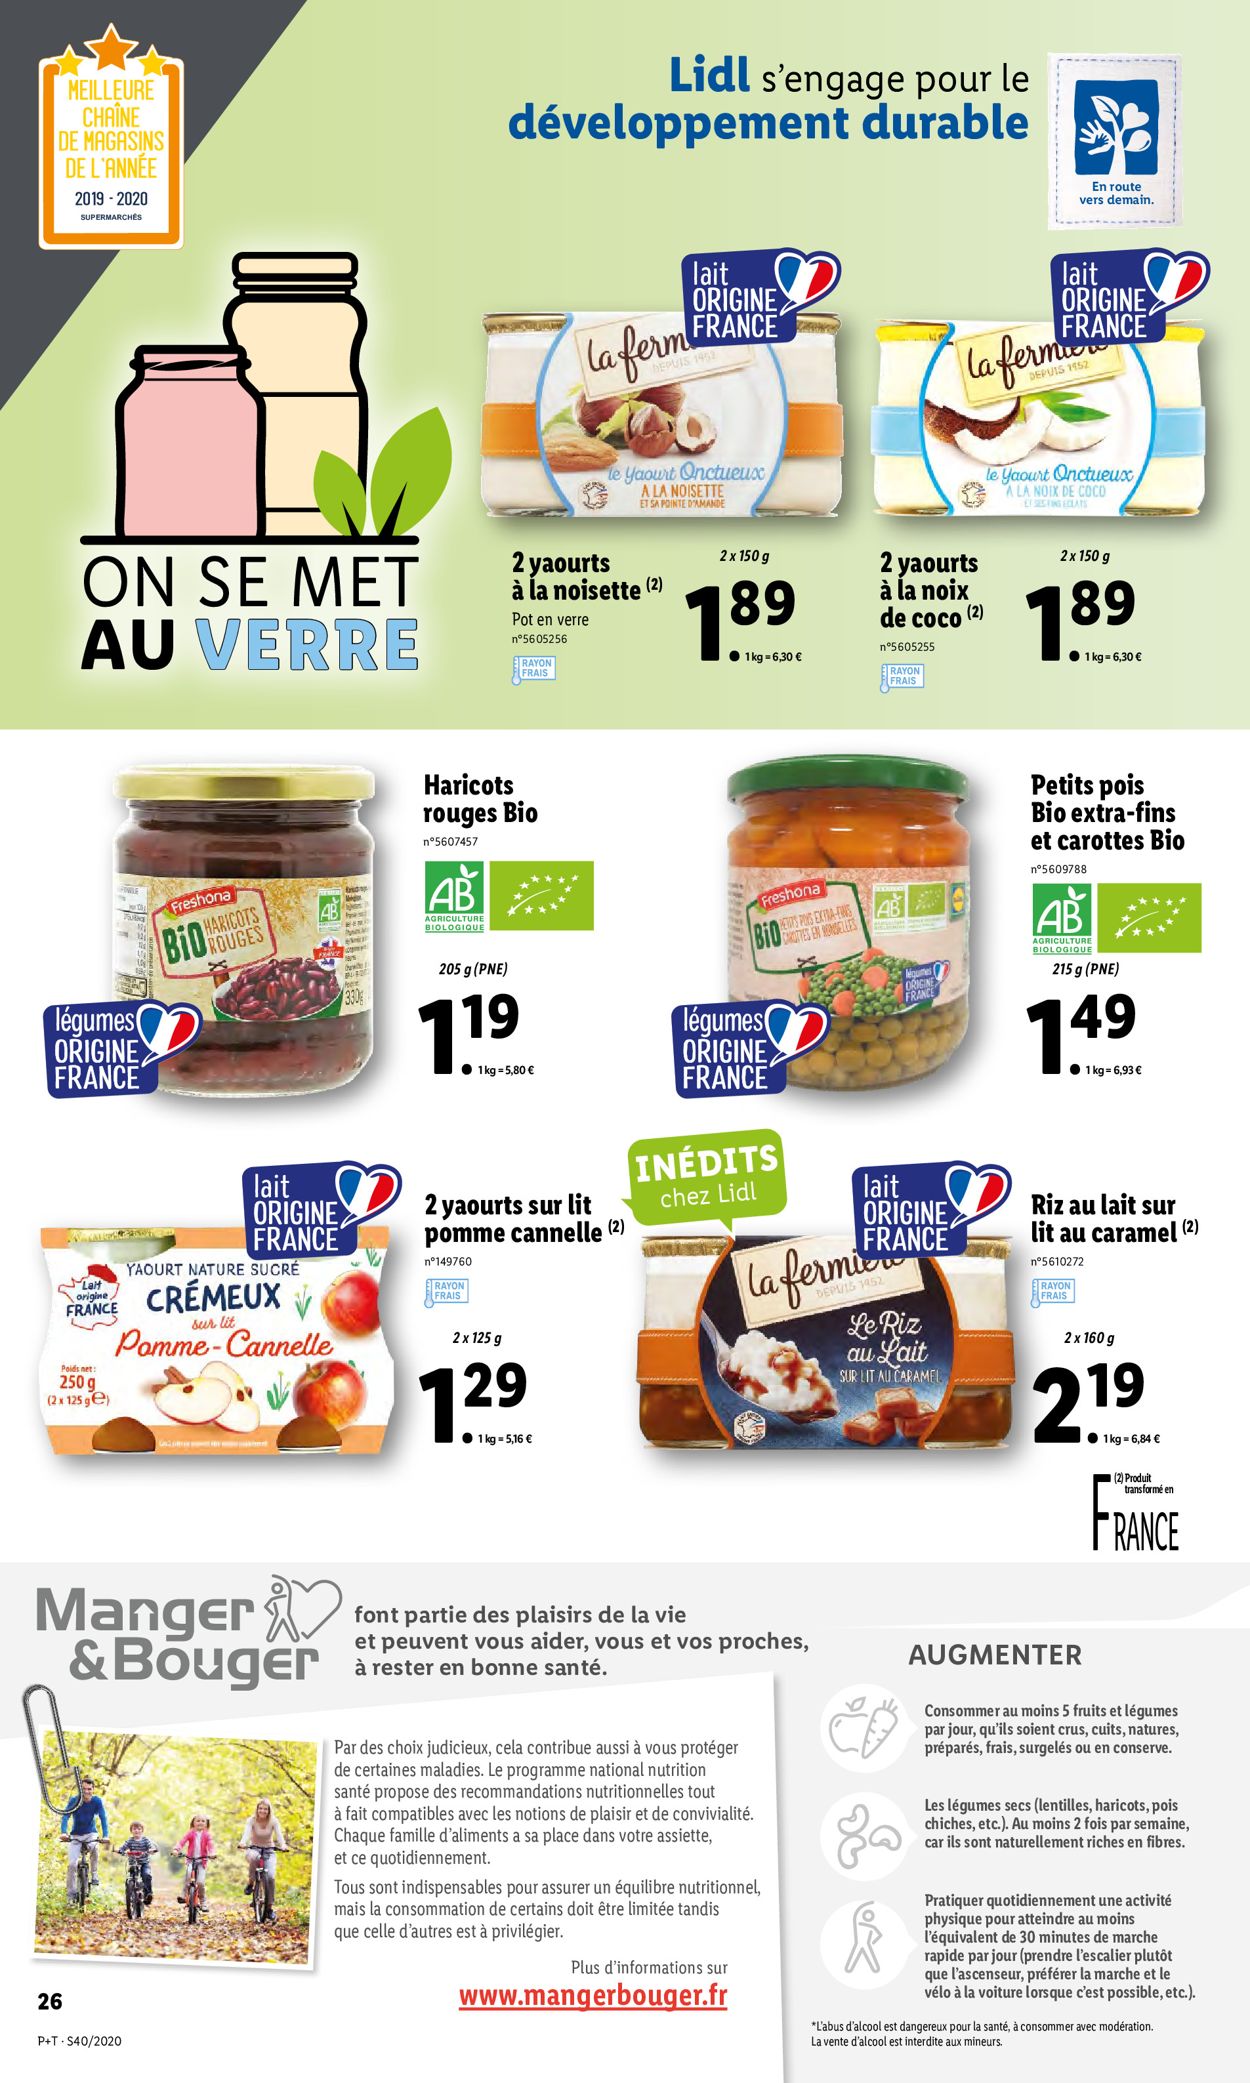 Lidl Catalogue - 30.09-06.10.2020 (Page 26)